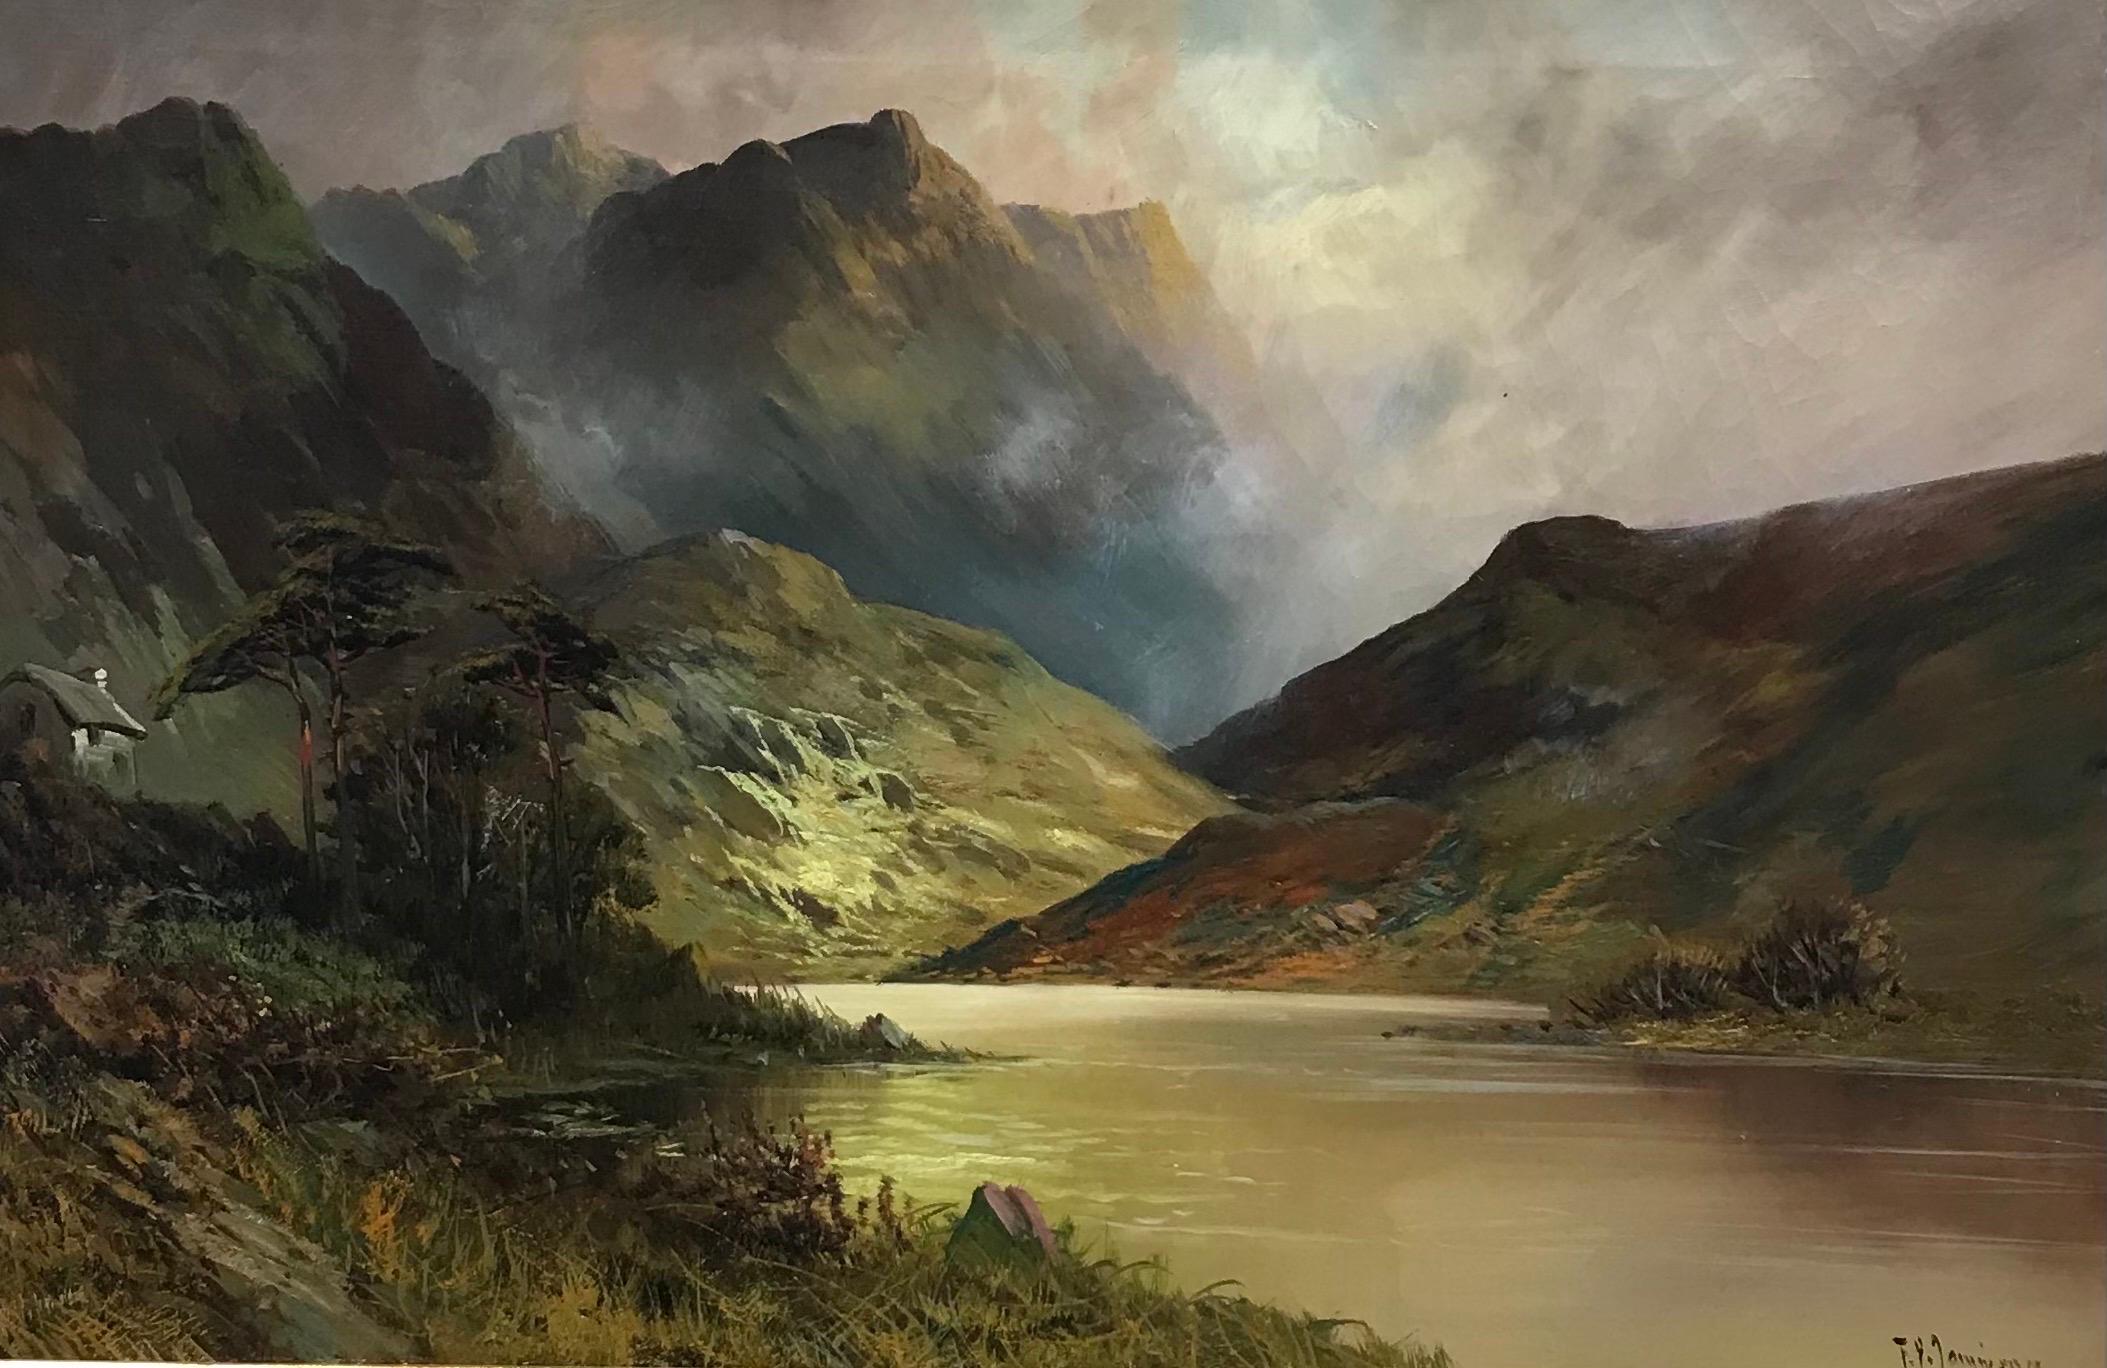 Francis E. Jamieson Landscape Painting - Large Scottish Highlands Loch Scene with Misty Mountains, antique oil painting